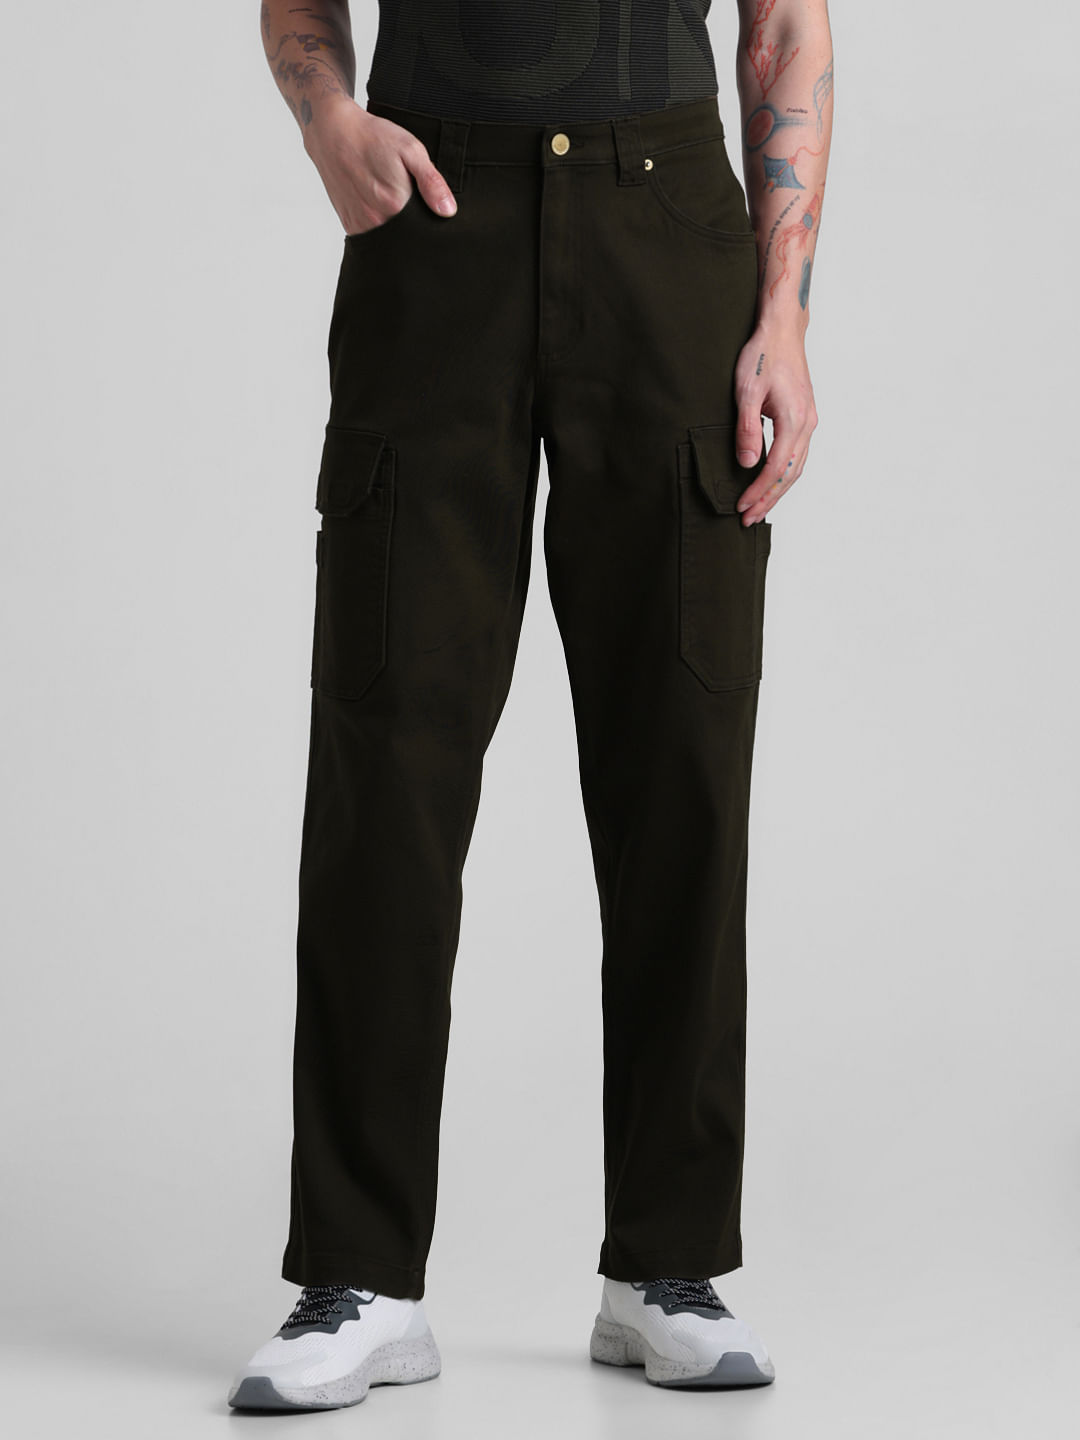 Reset by Jane Wide Leg Cargo Pants - Olive